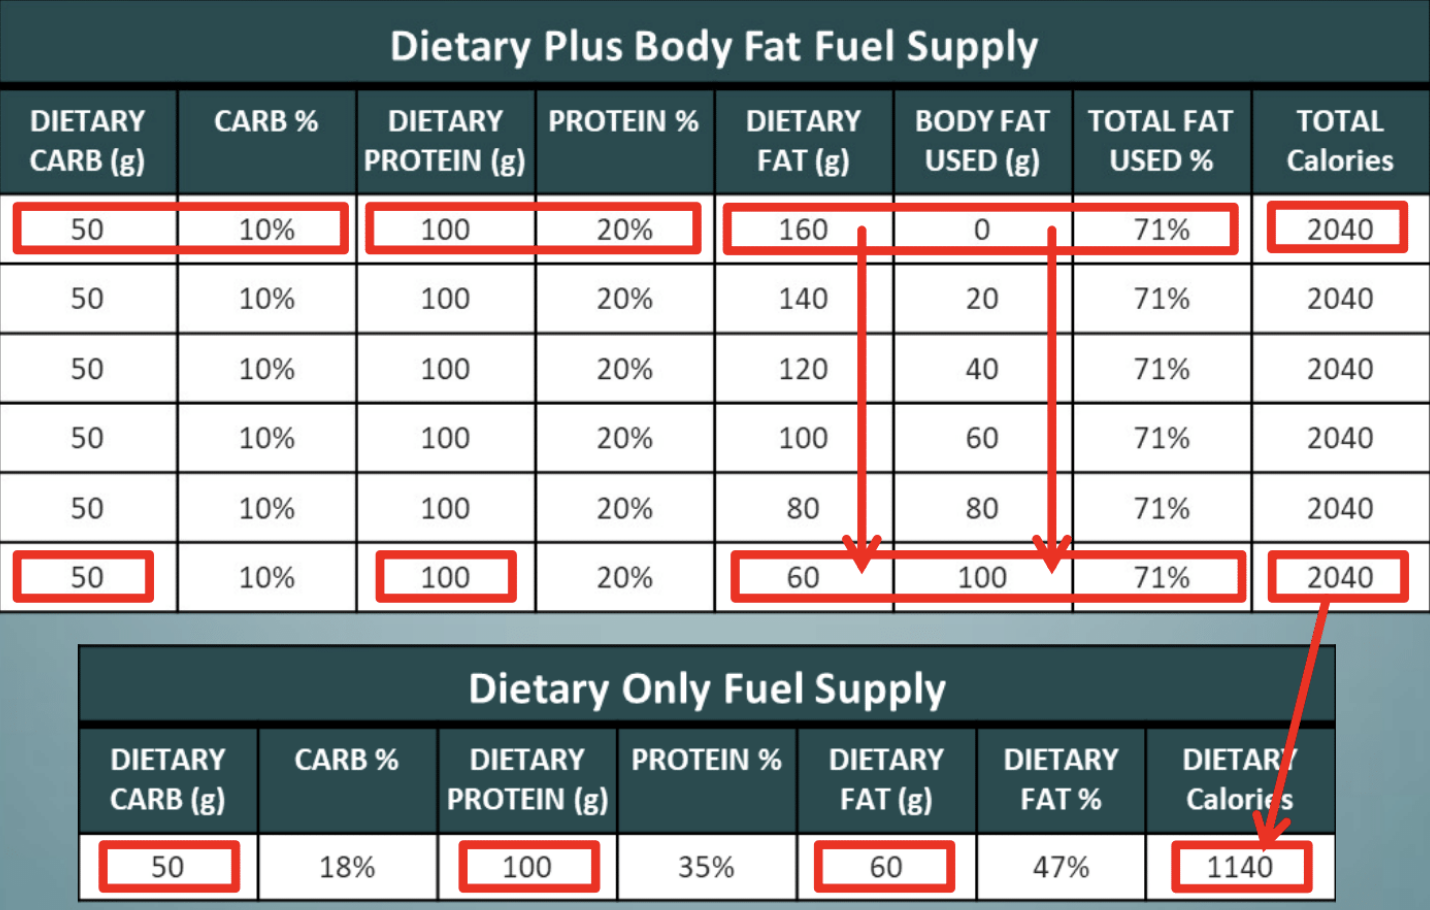 Low carb, keto, weight loss stall, Body Fat as a fuel source, use dietary fat and body fat for fuel